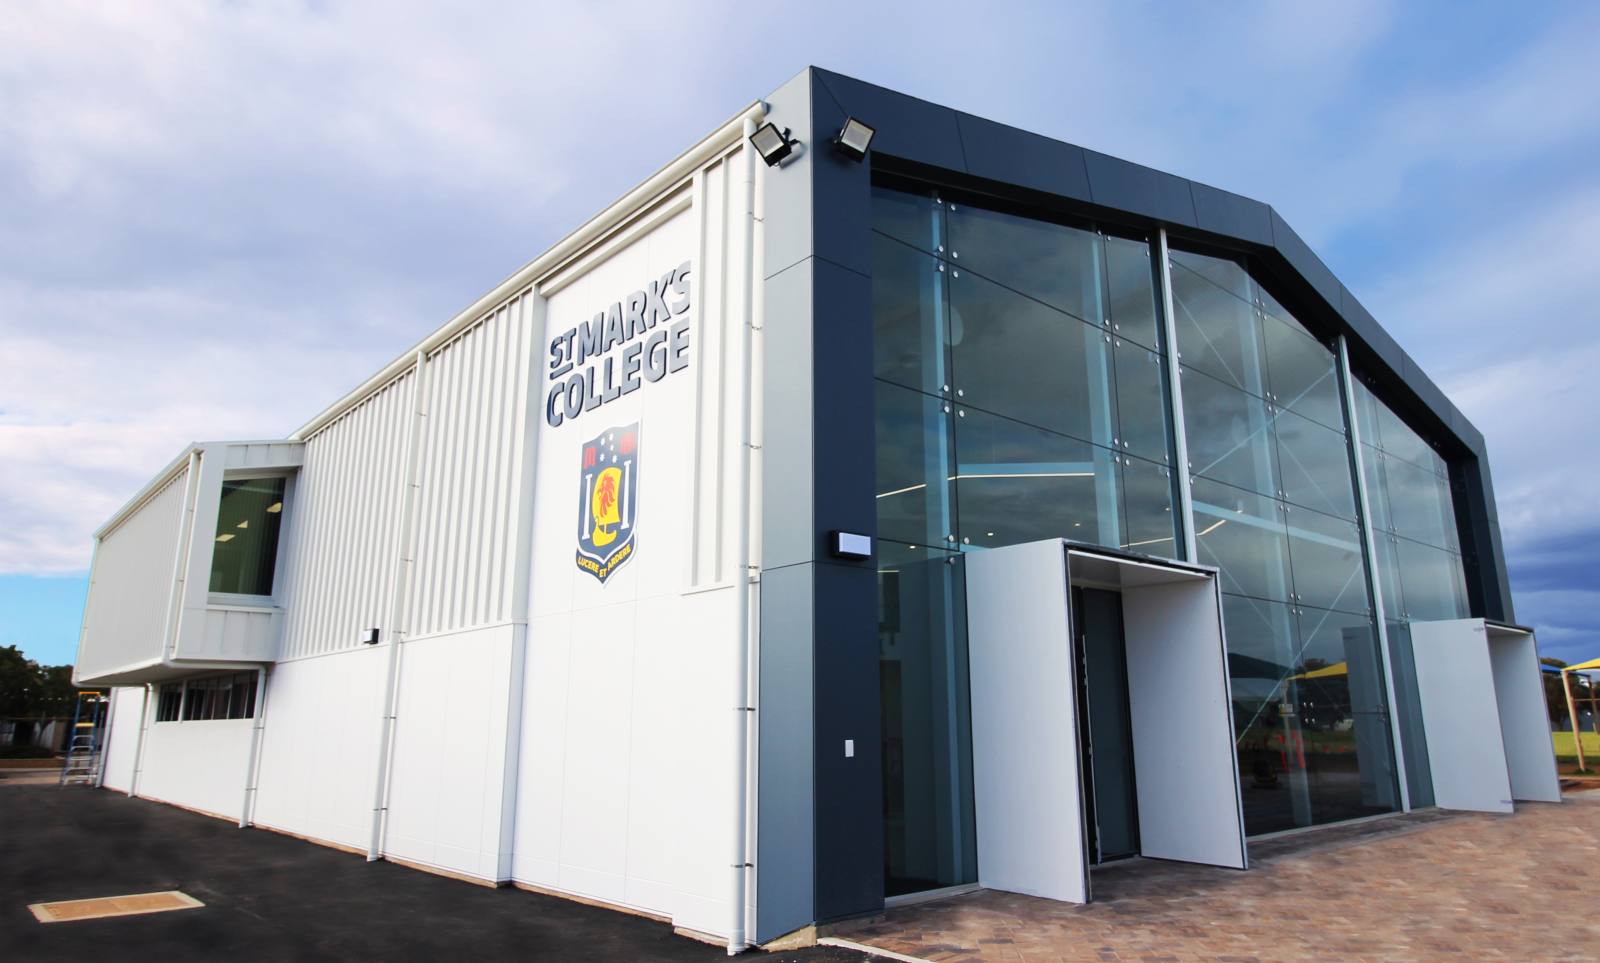 St Marks College new sports and science centre